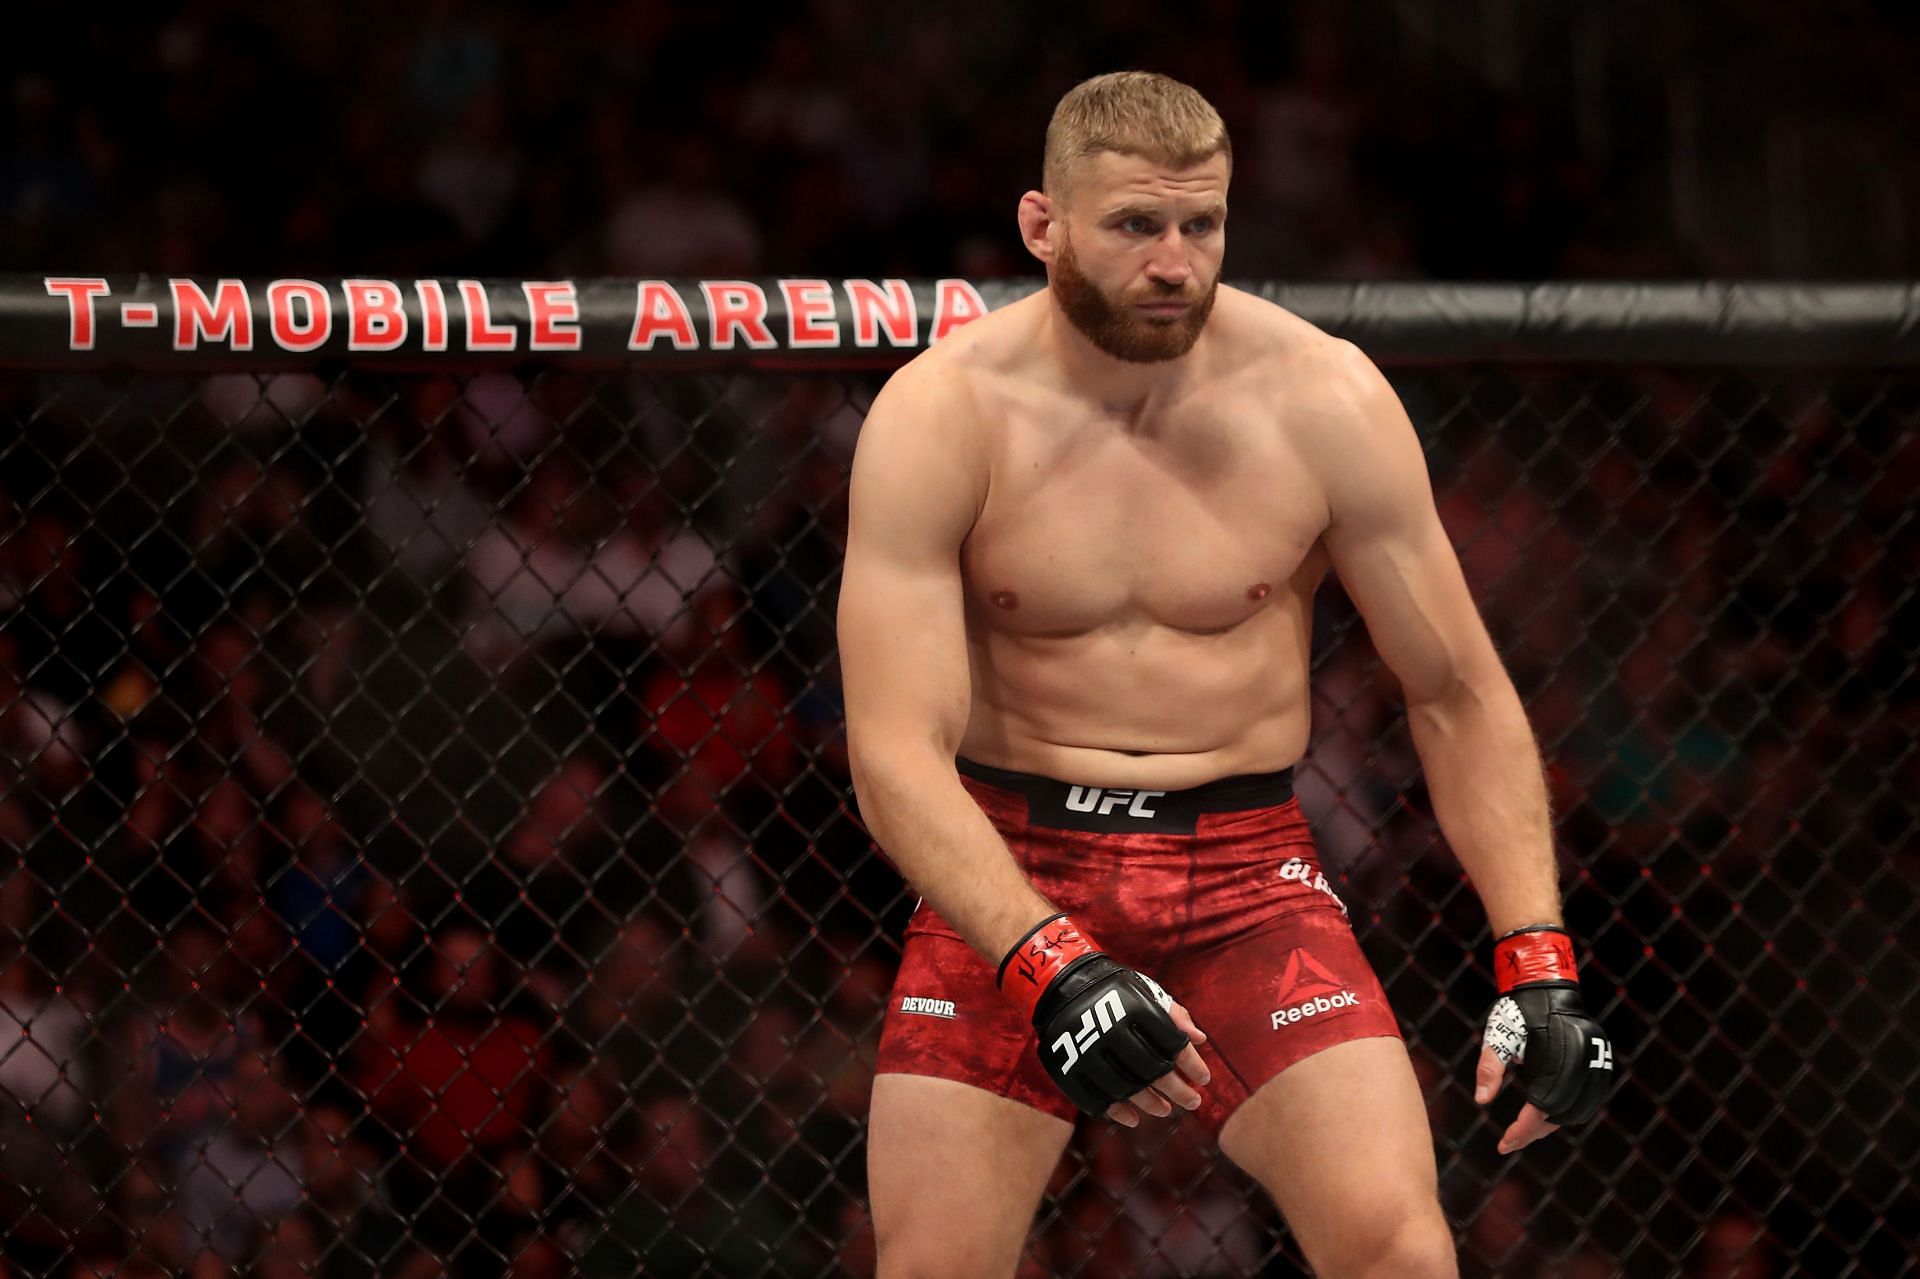 Jan Blachowicz holds a record of 28-9